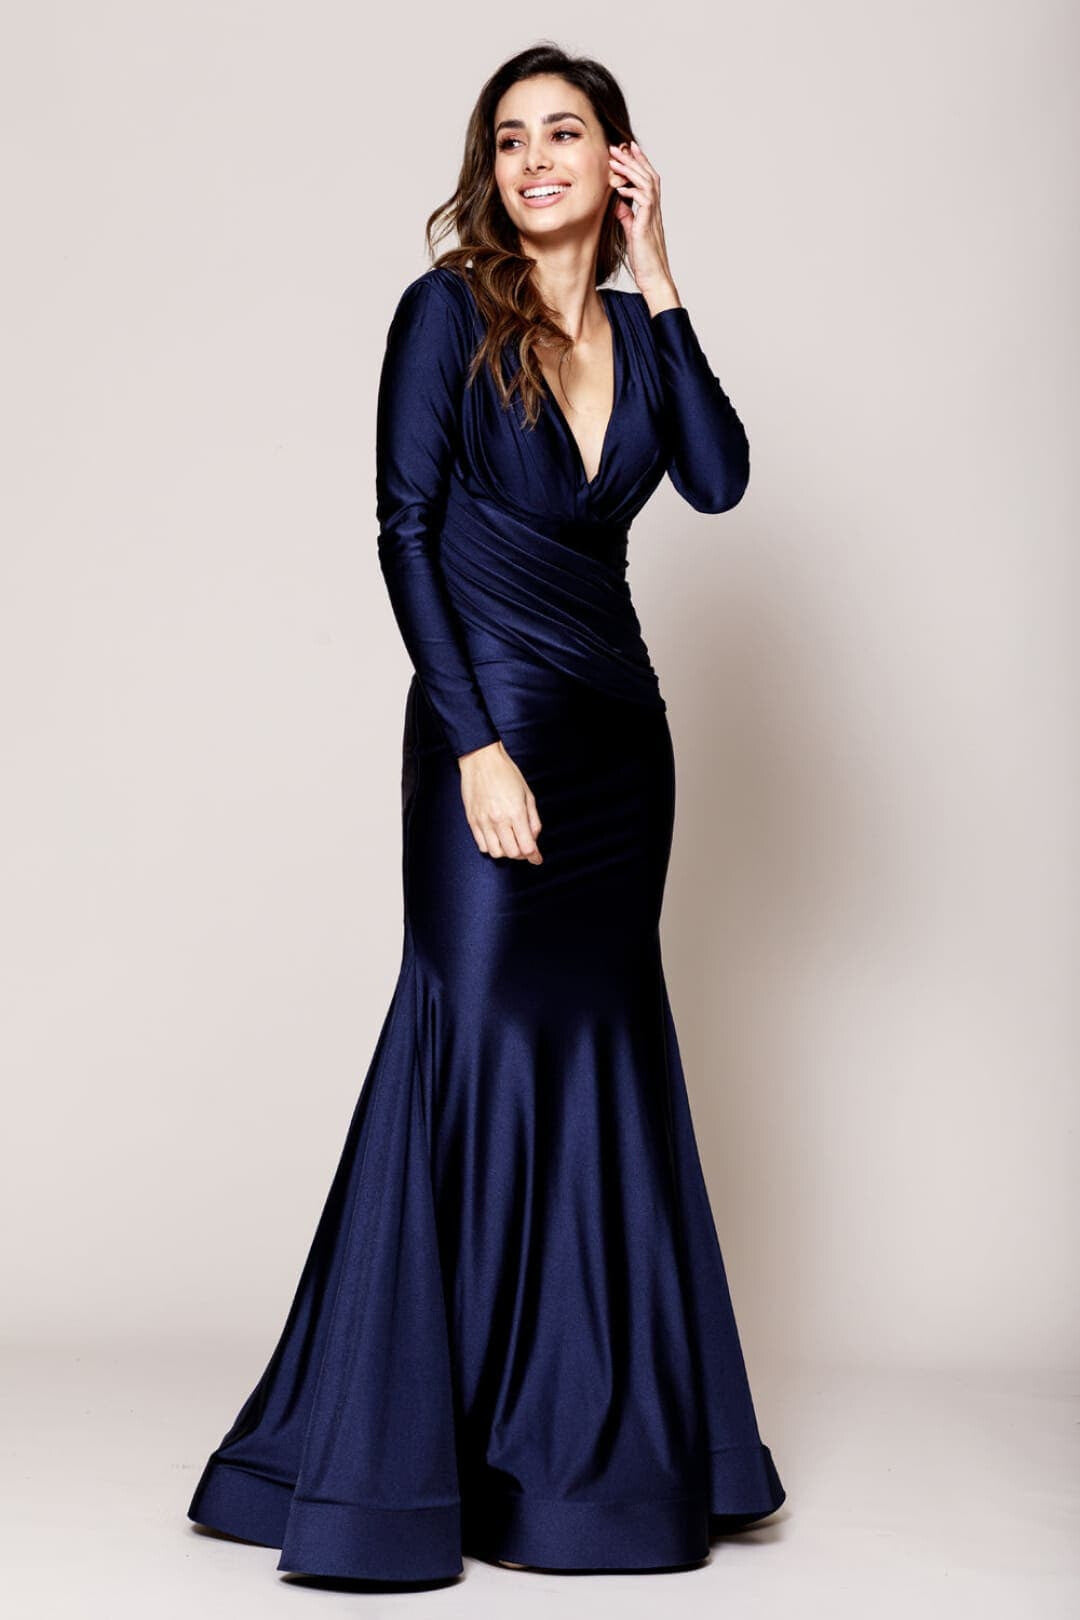 Stretchy Evening Prom Gown - NAVY / 2